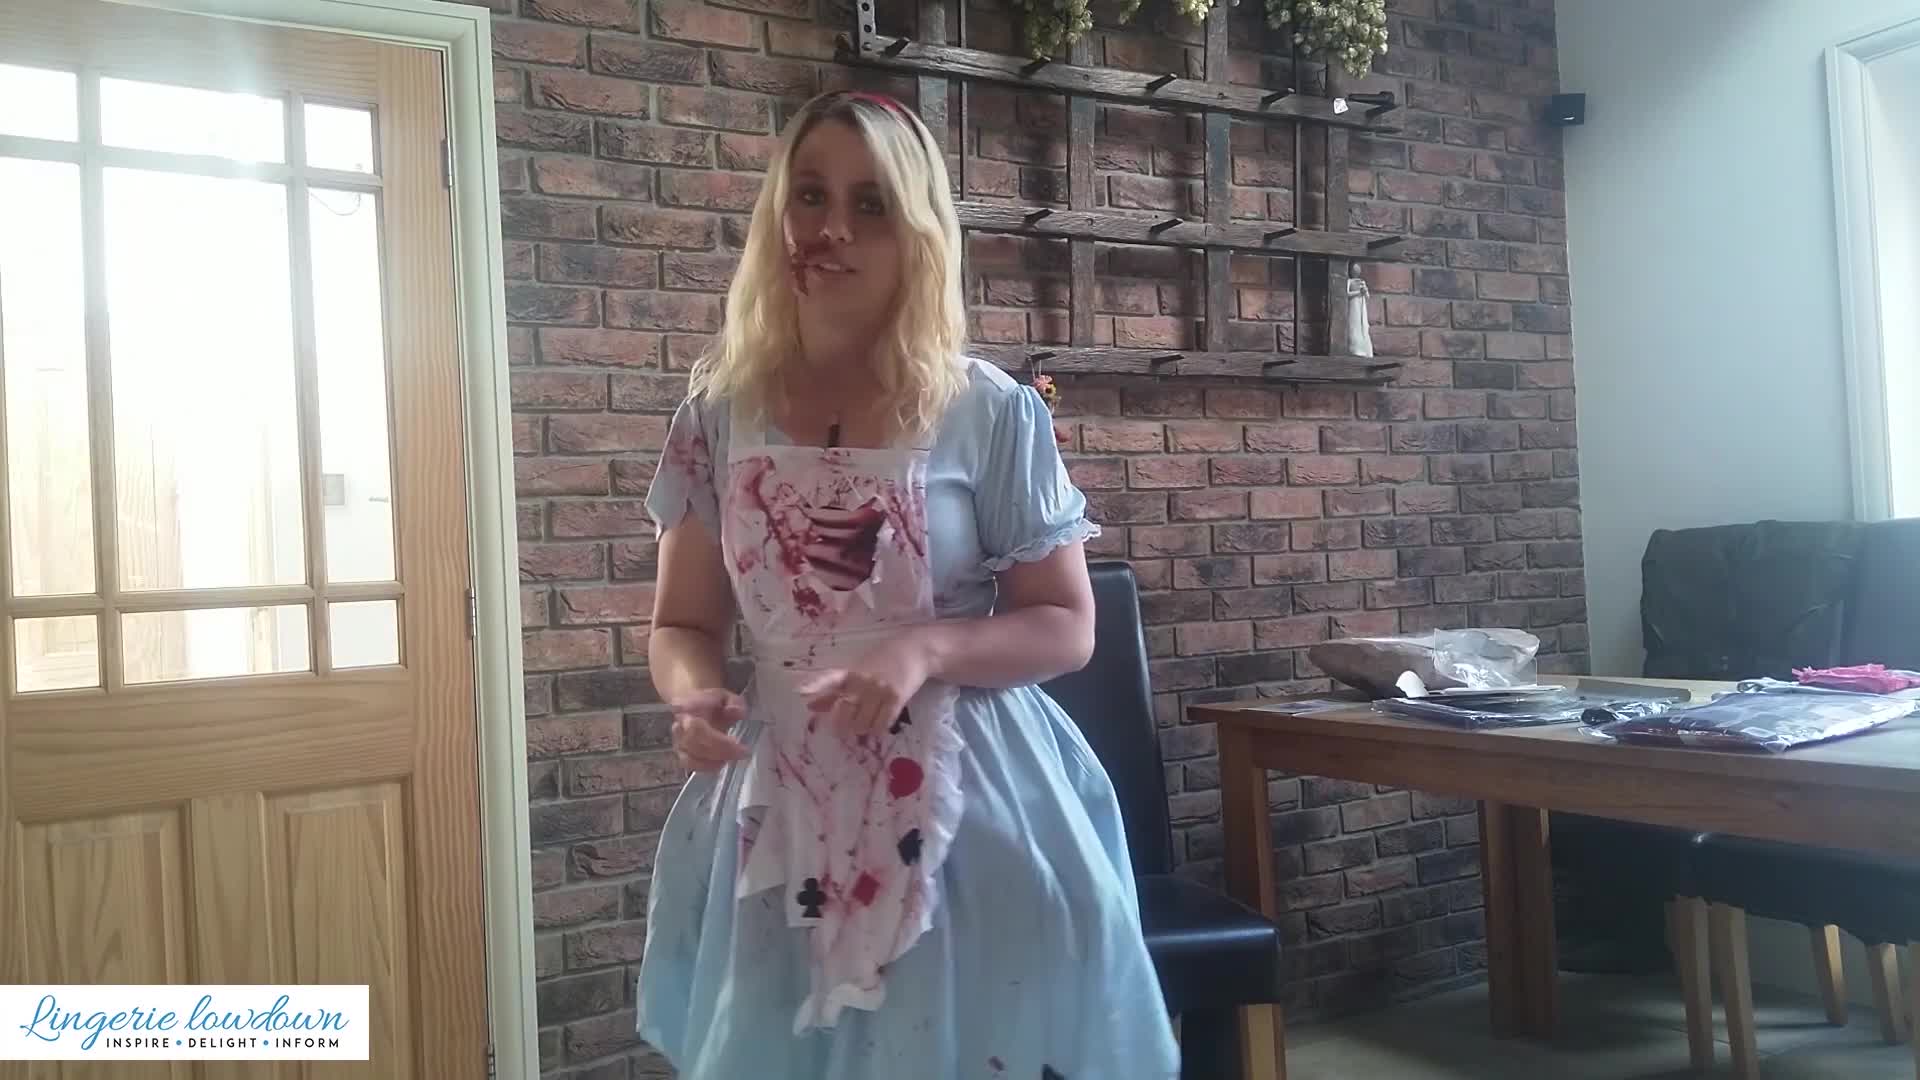 PoppyMcleanModel  Bristol Novelty zombie prom queen costume and unbranded fishnet tights [PREVIEW]